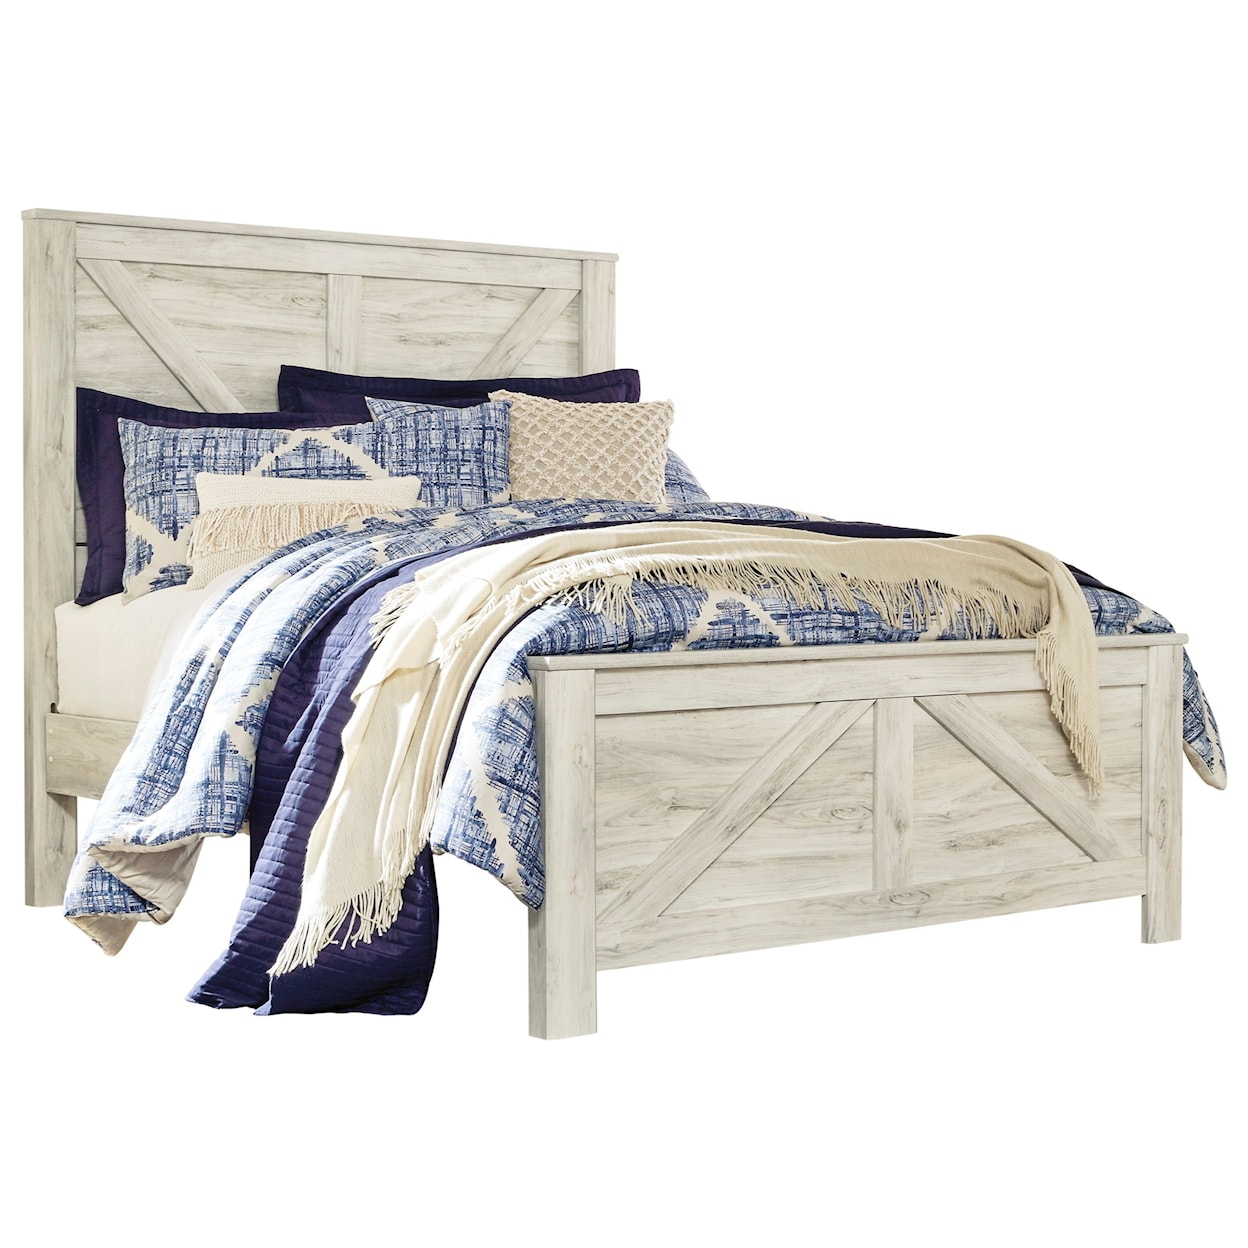 Signature Design by Ashley Bellaby Queen Bed